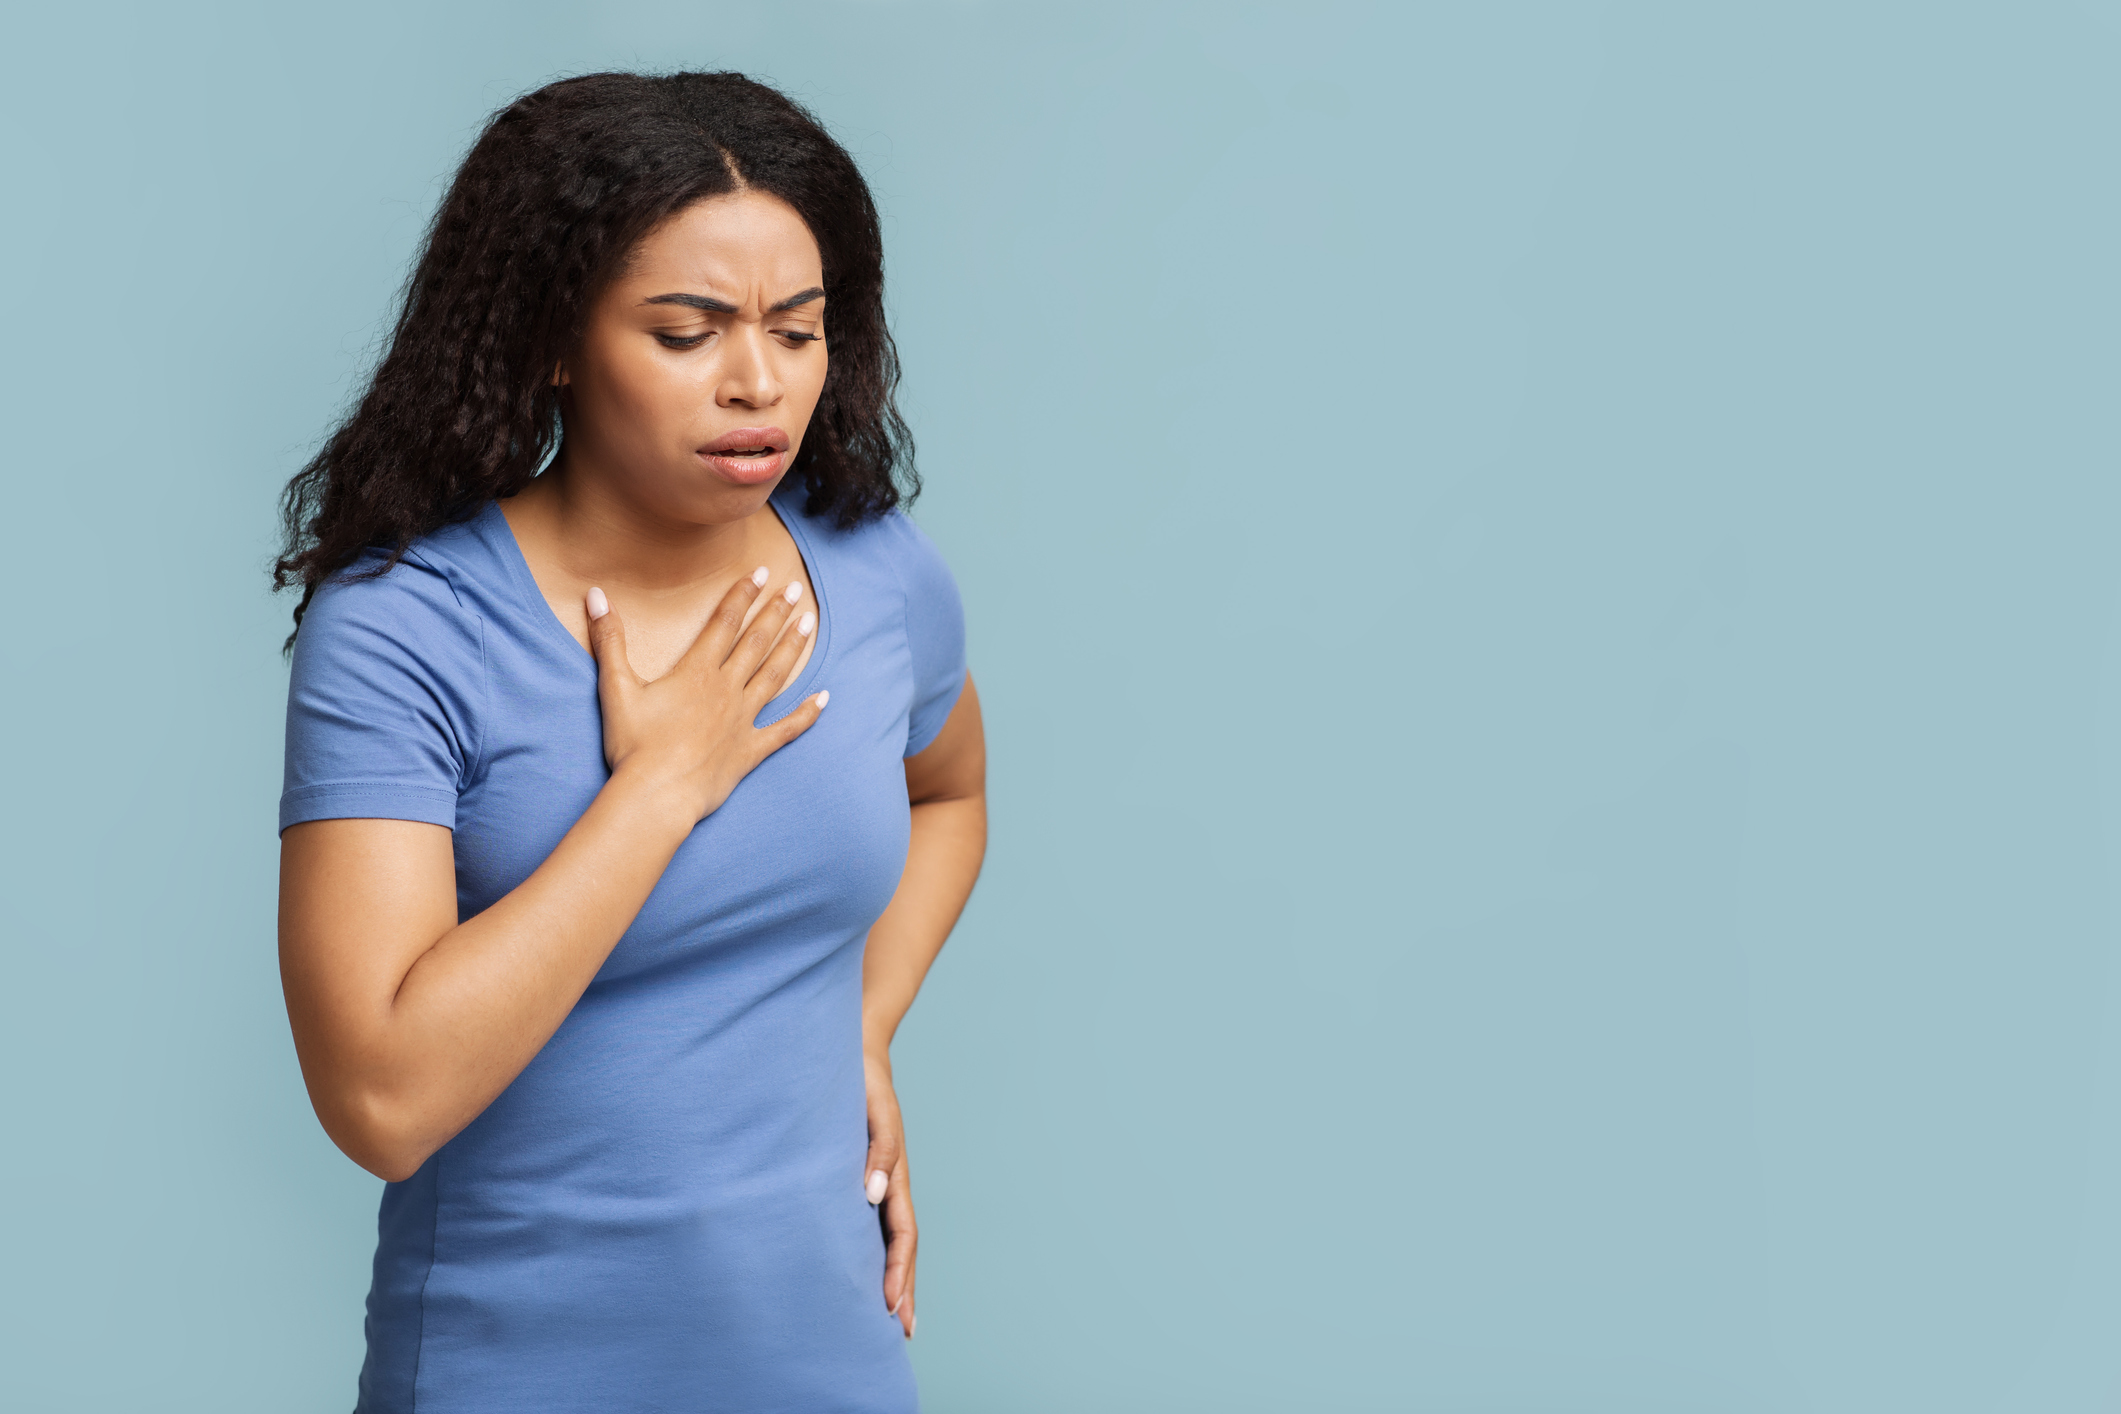 Inflammation may make post-COVID breathing more difficult